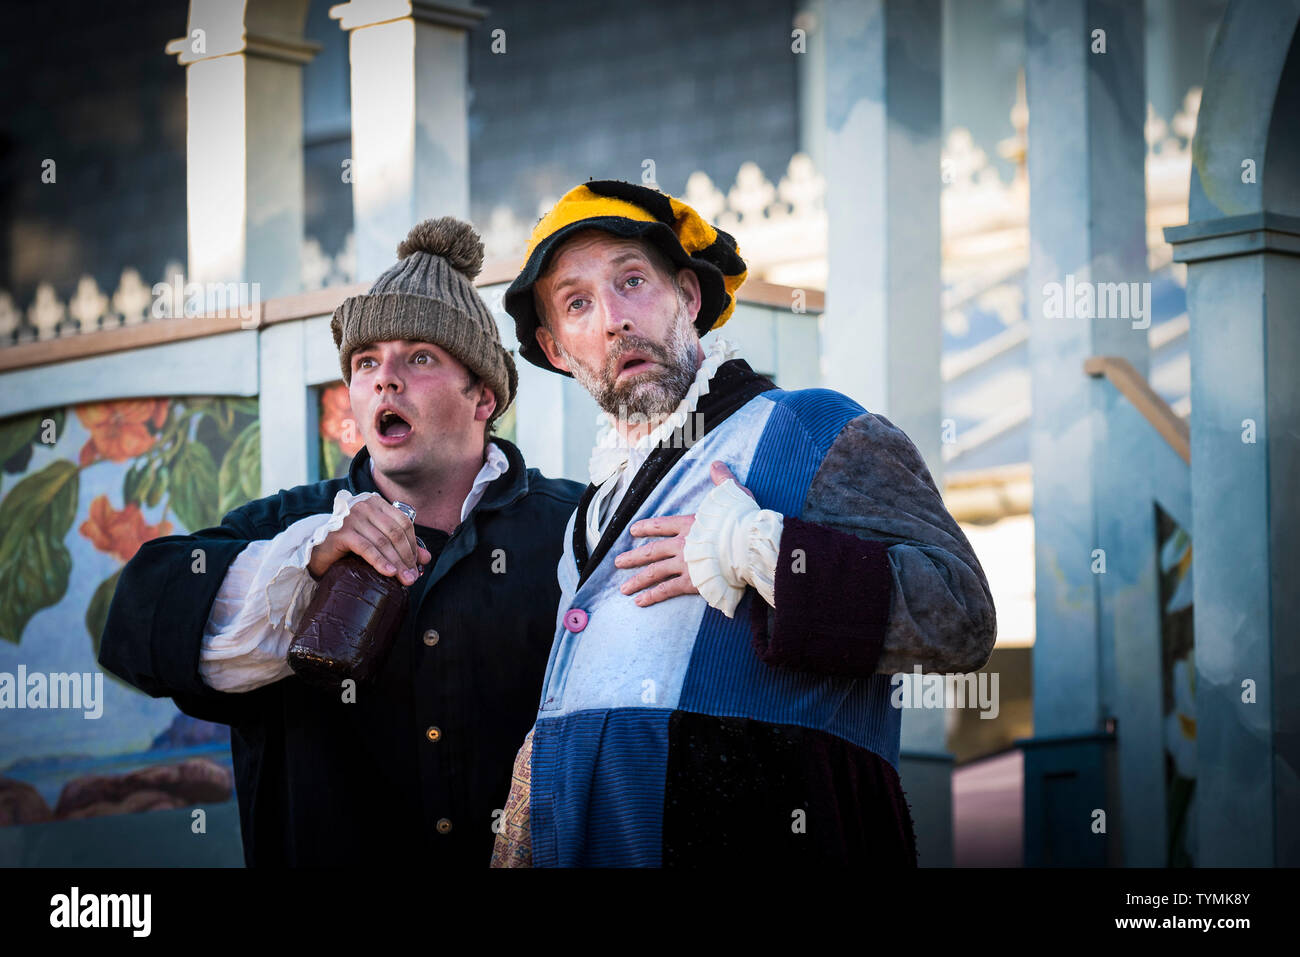 Actors Chris Wills, David Sayers performing the roles of Caliban and Stephano in an outdoor theatre production of The Tempest by Illyria Theatre in Fa Stock Photo